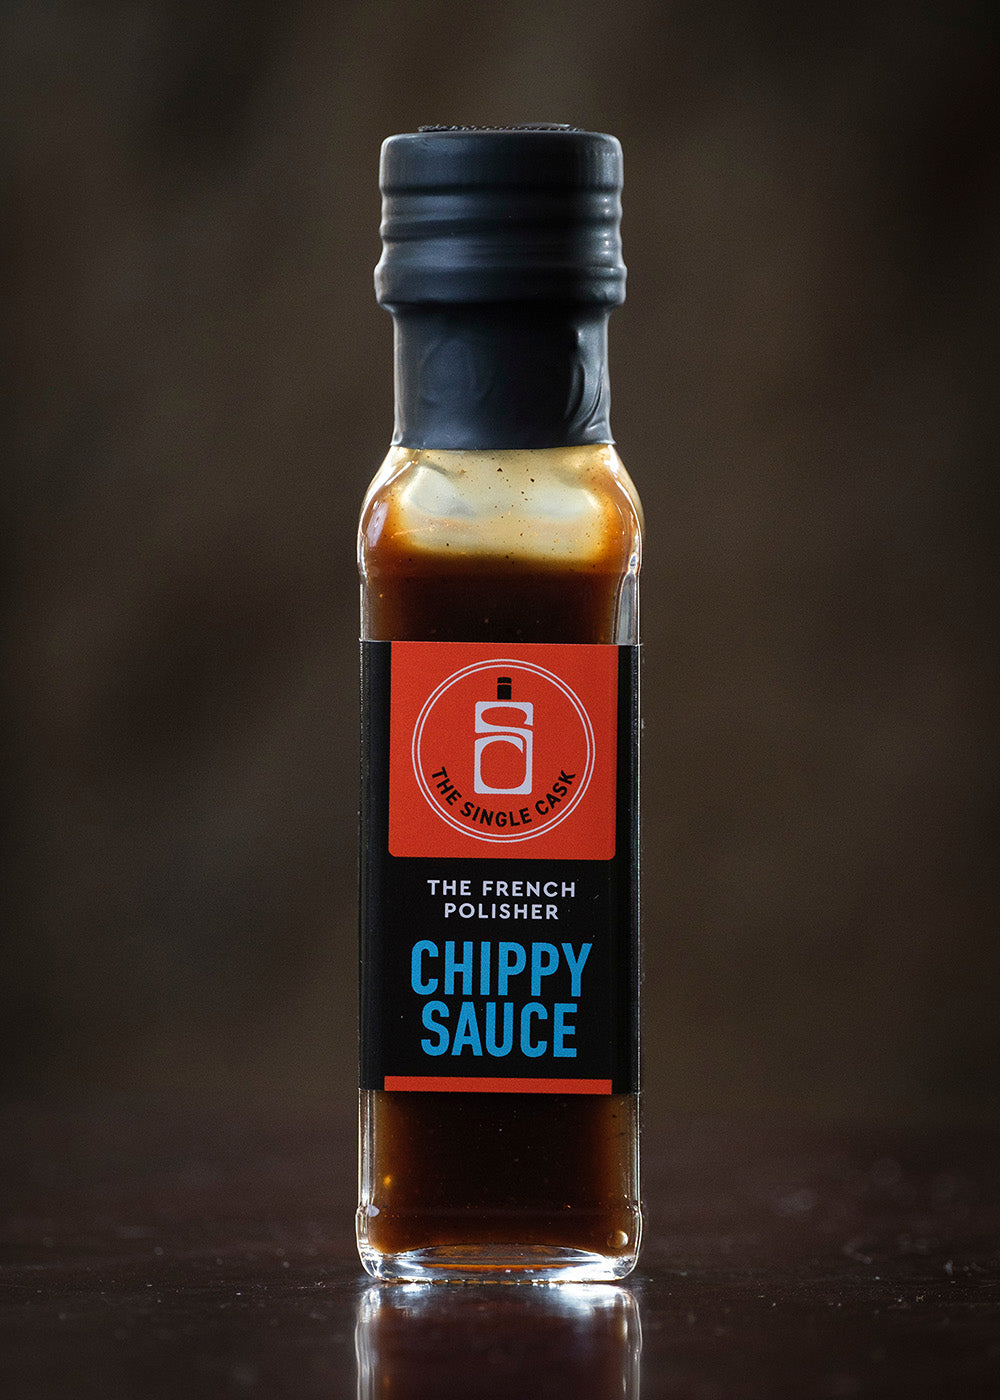 The French Polisher Chippy Sauce